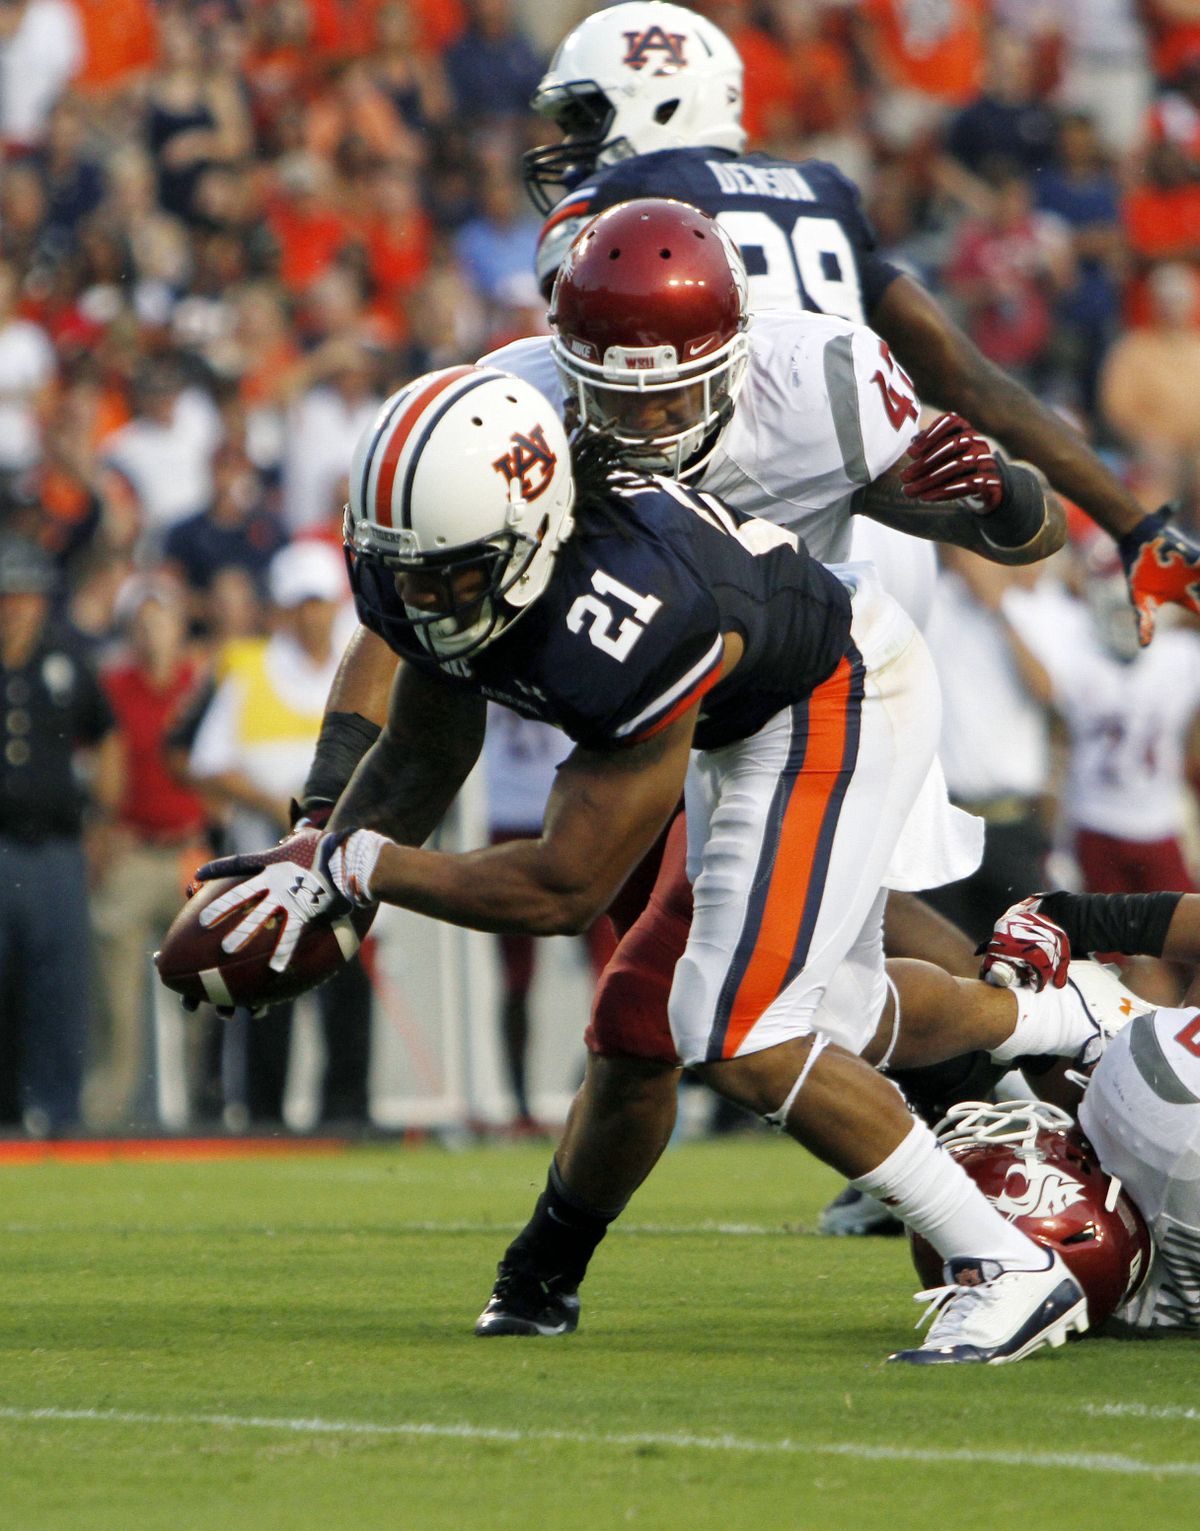 Auburn RB Tre Mason stretches for the end zone in the first quarter. (Associated Press)